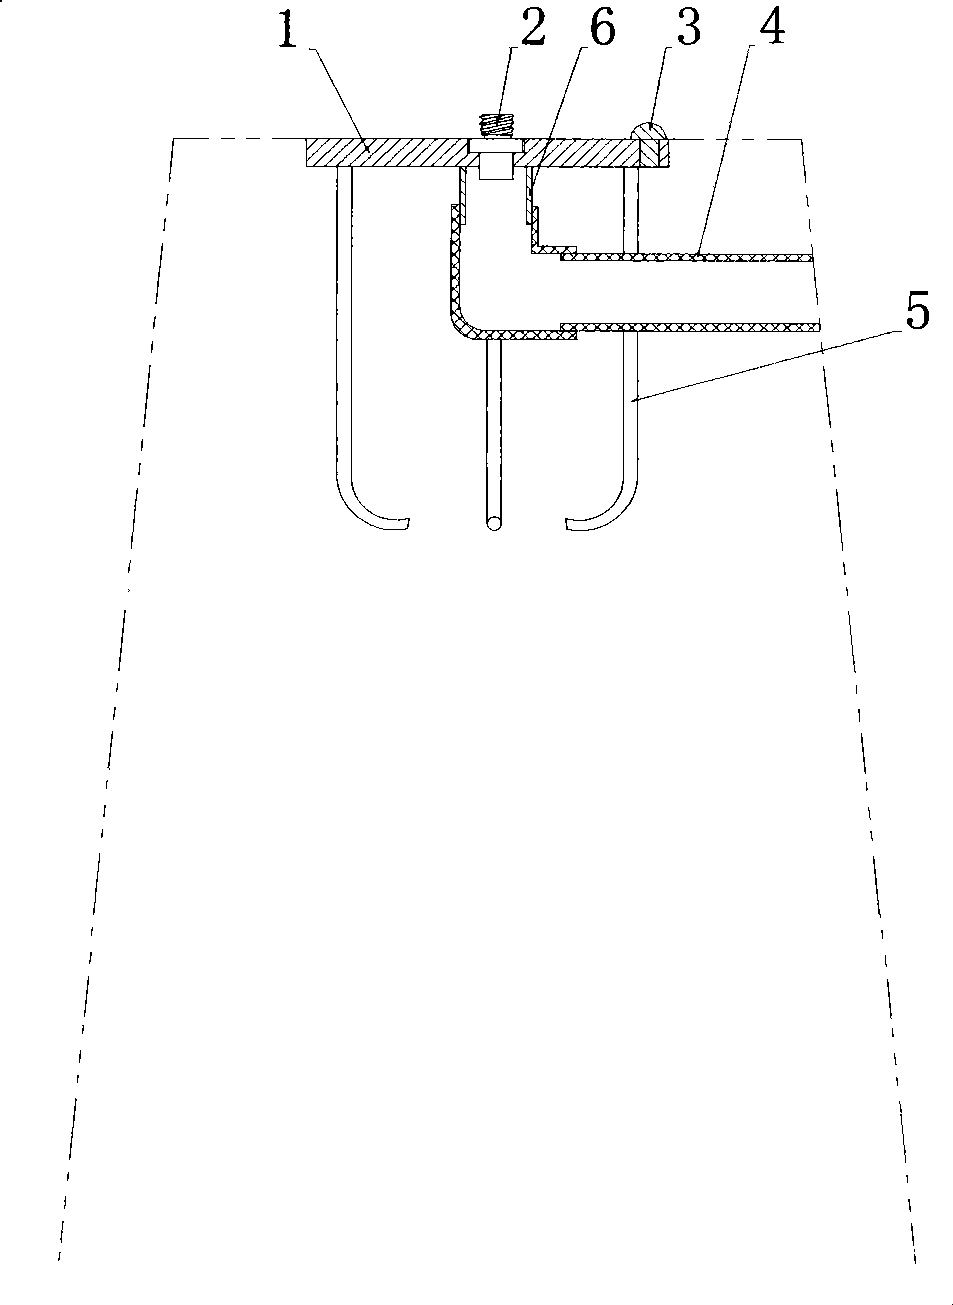 Forced centering plate and embedding method